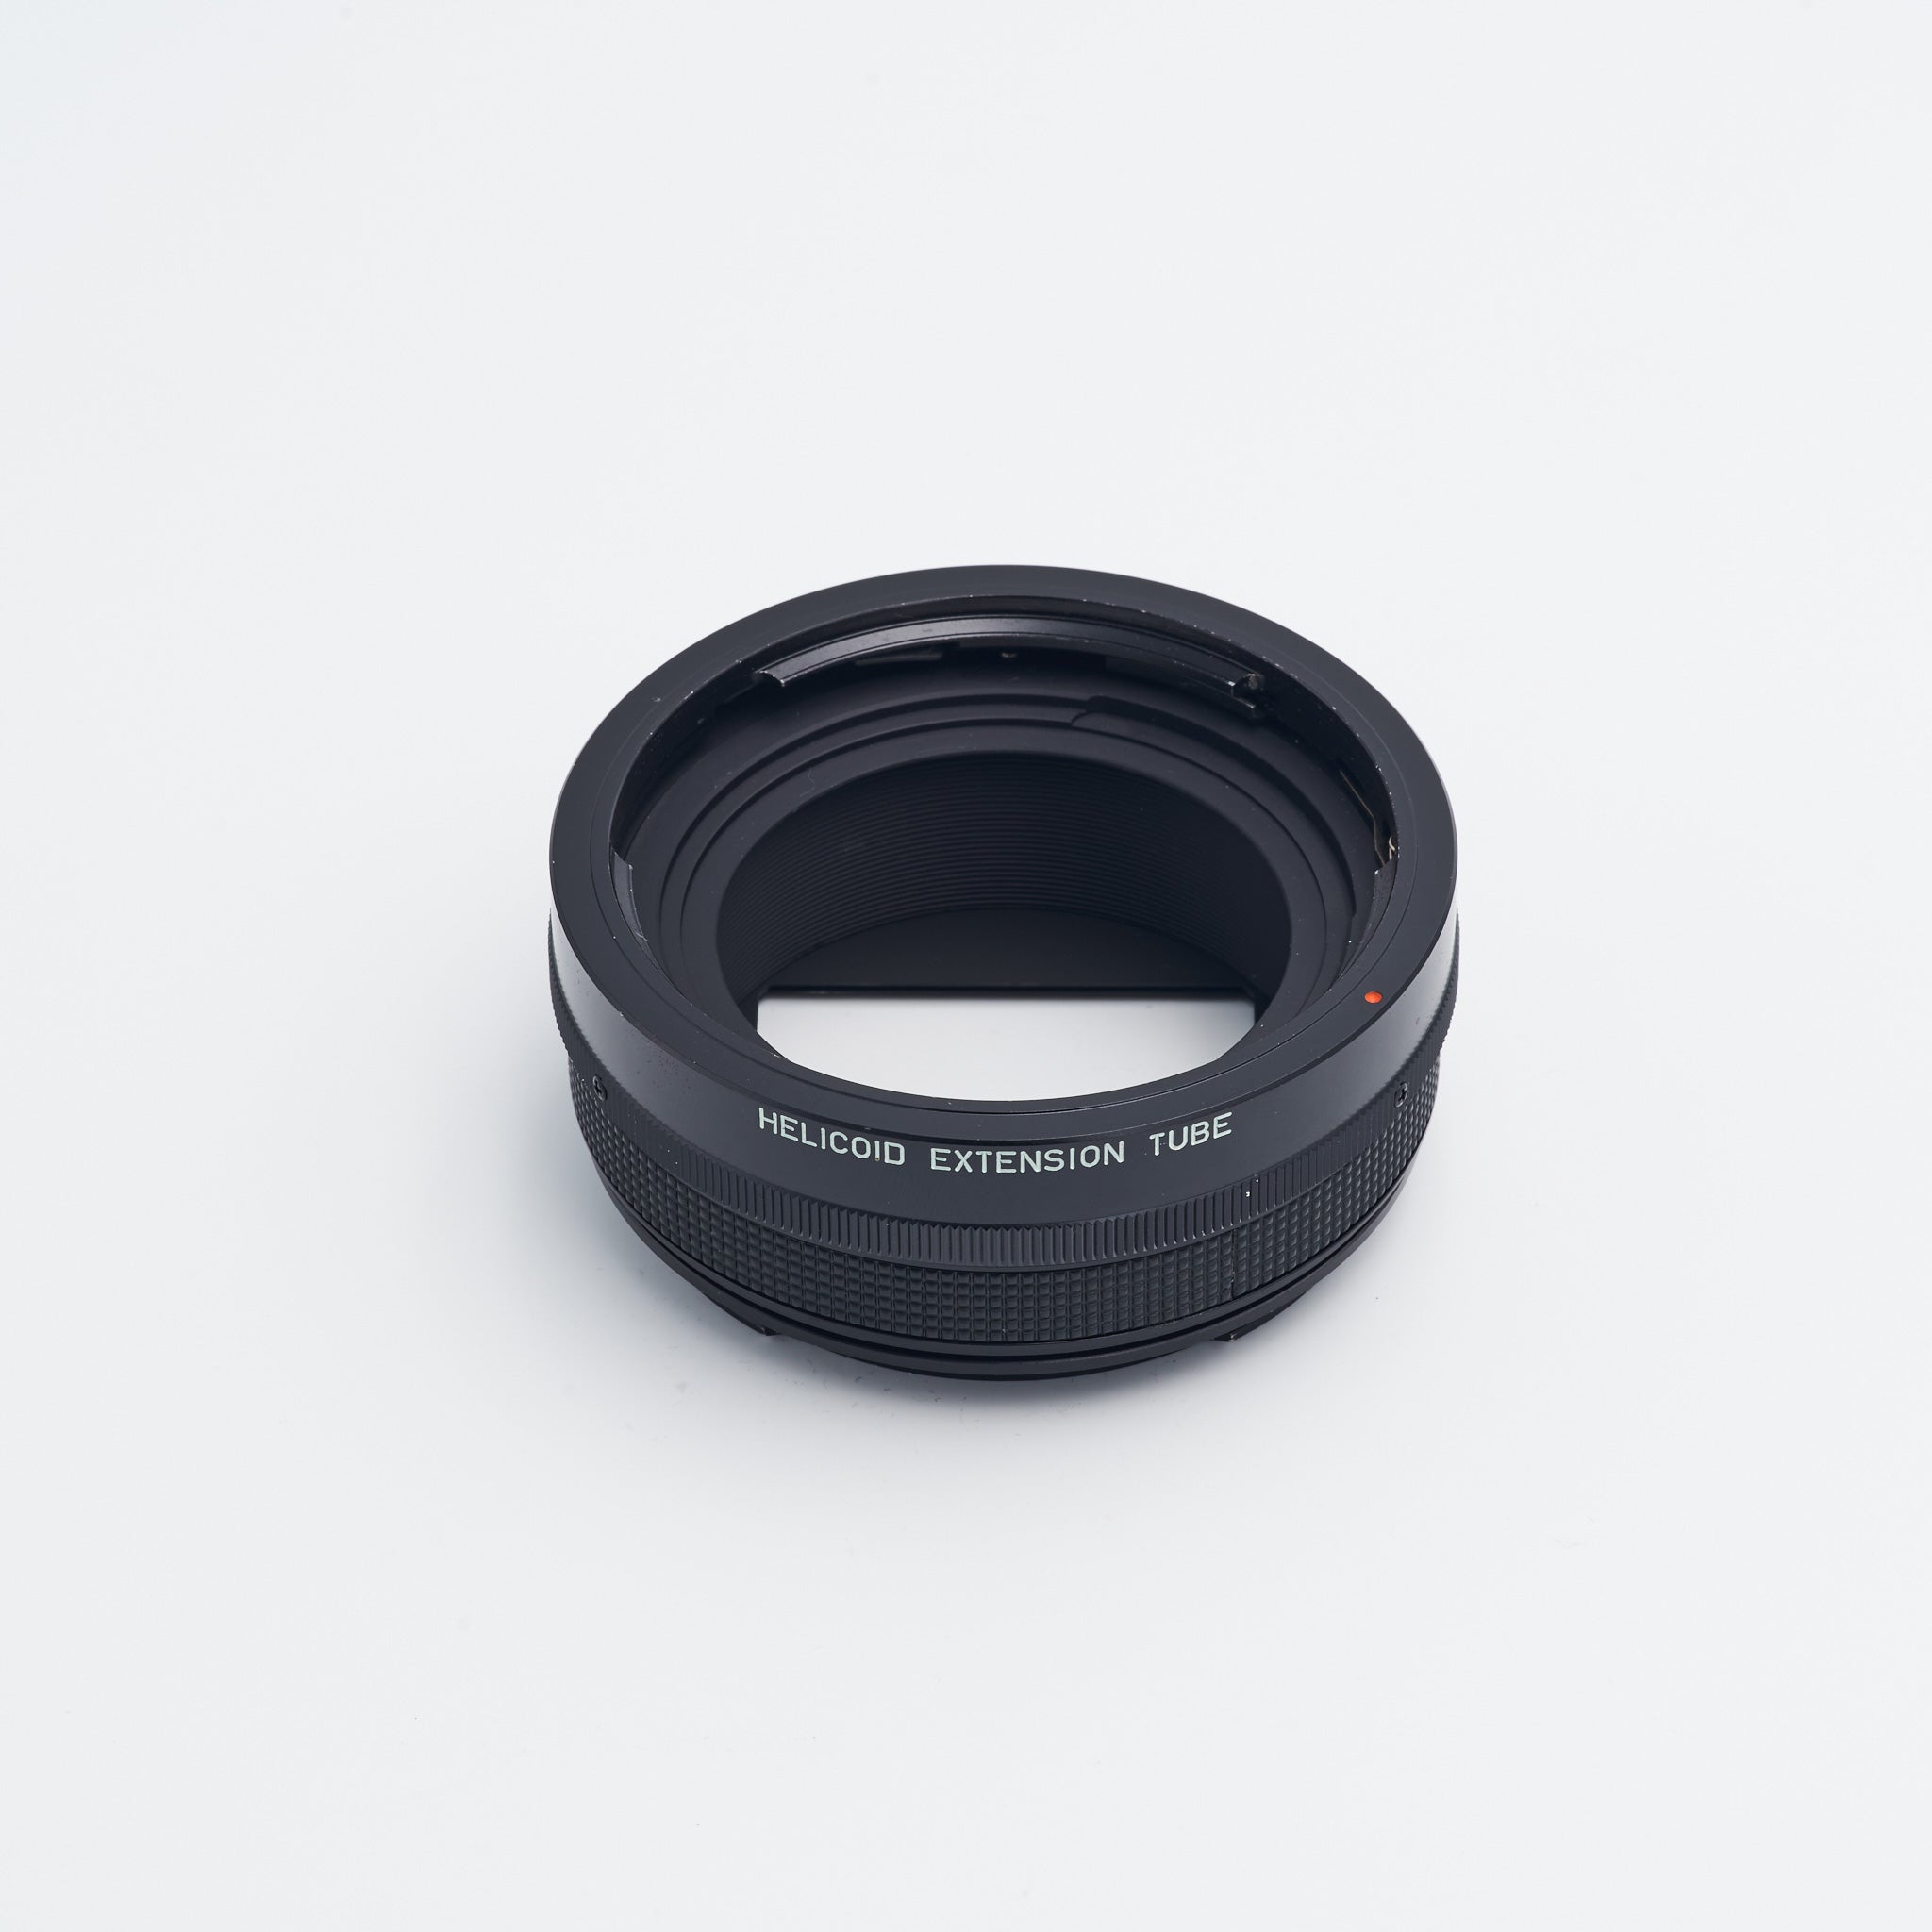 Pentax 67 Helicoid Extension Tube (int. S/N 0049)